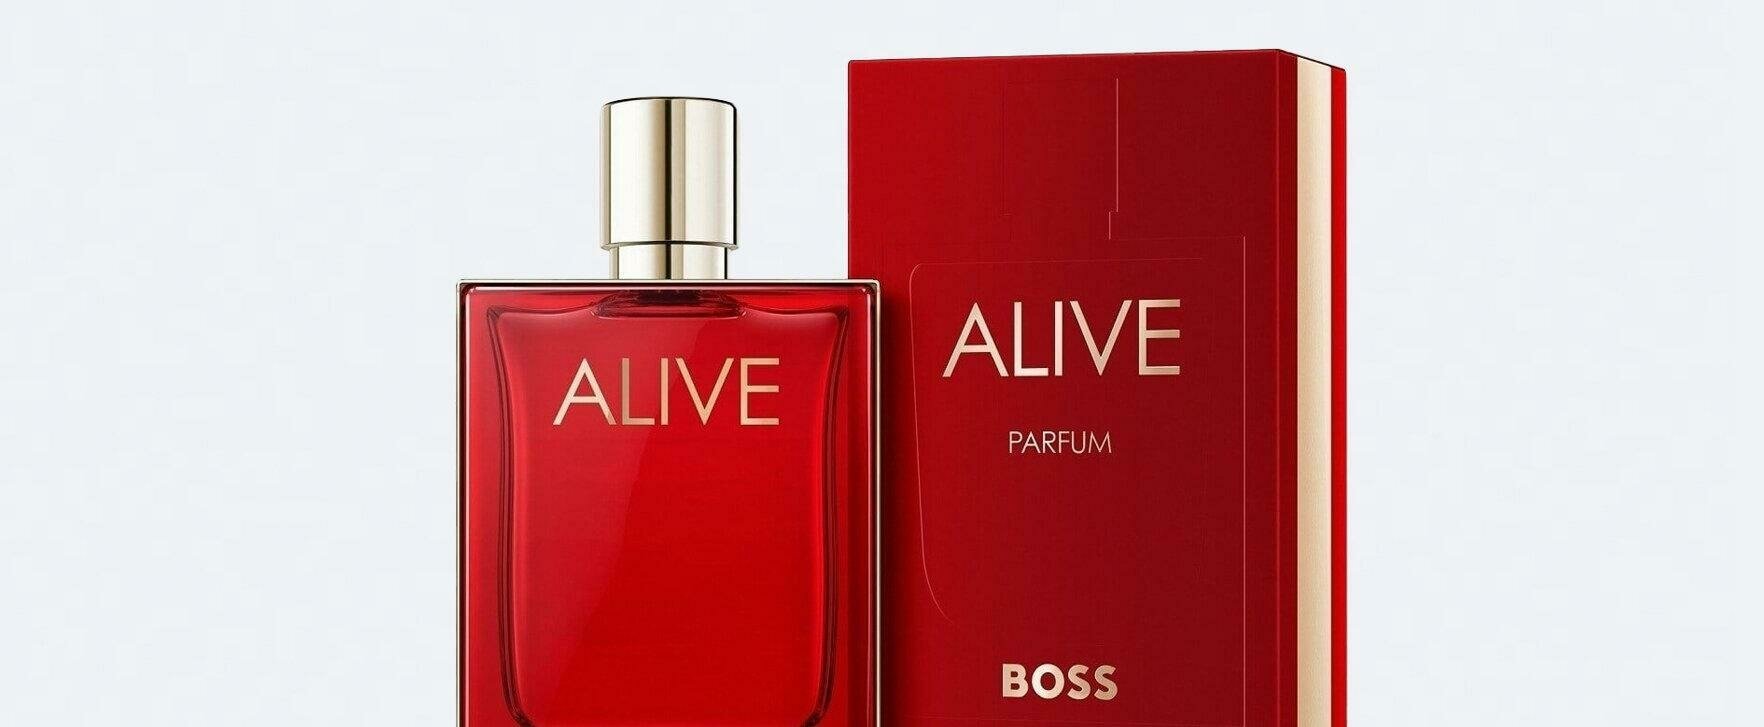 Hugo Boss Expands Its Successful “Boss Alive” Fragrance Series With a New Feminine Creation